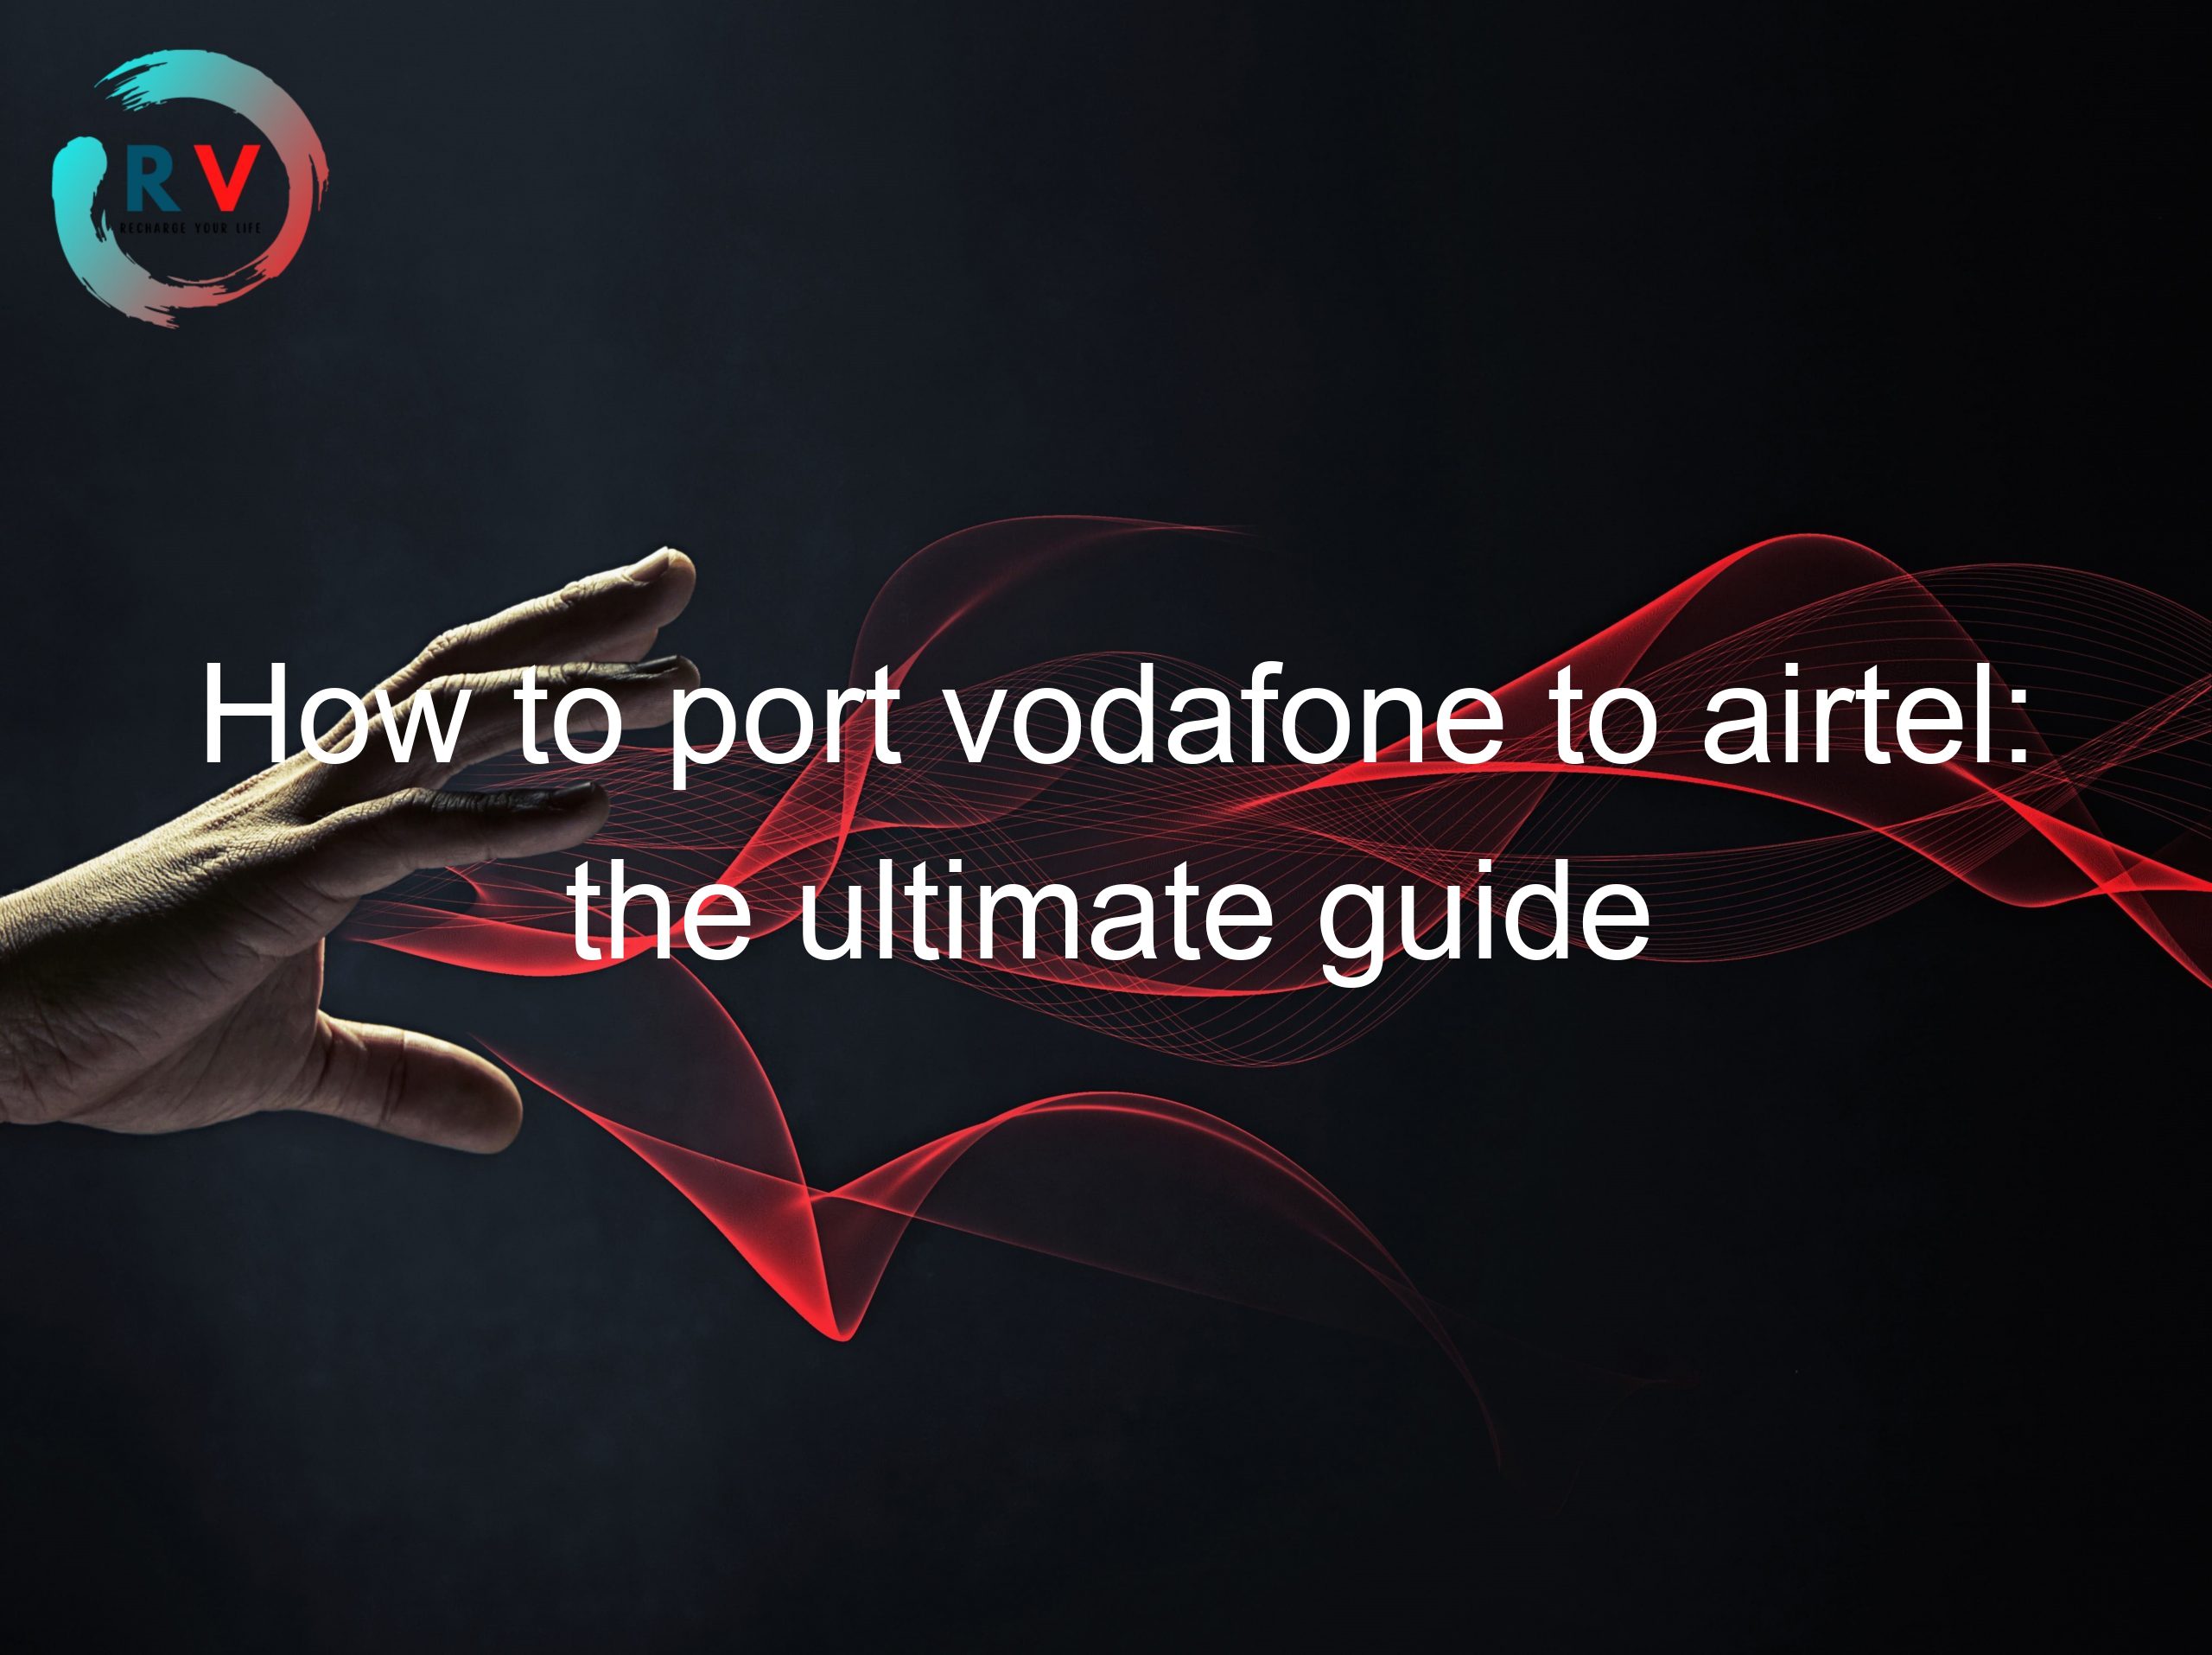 How to port vodafone to airtel: the ultimate guide